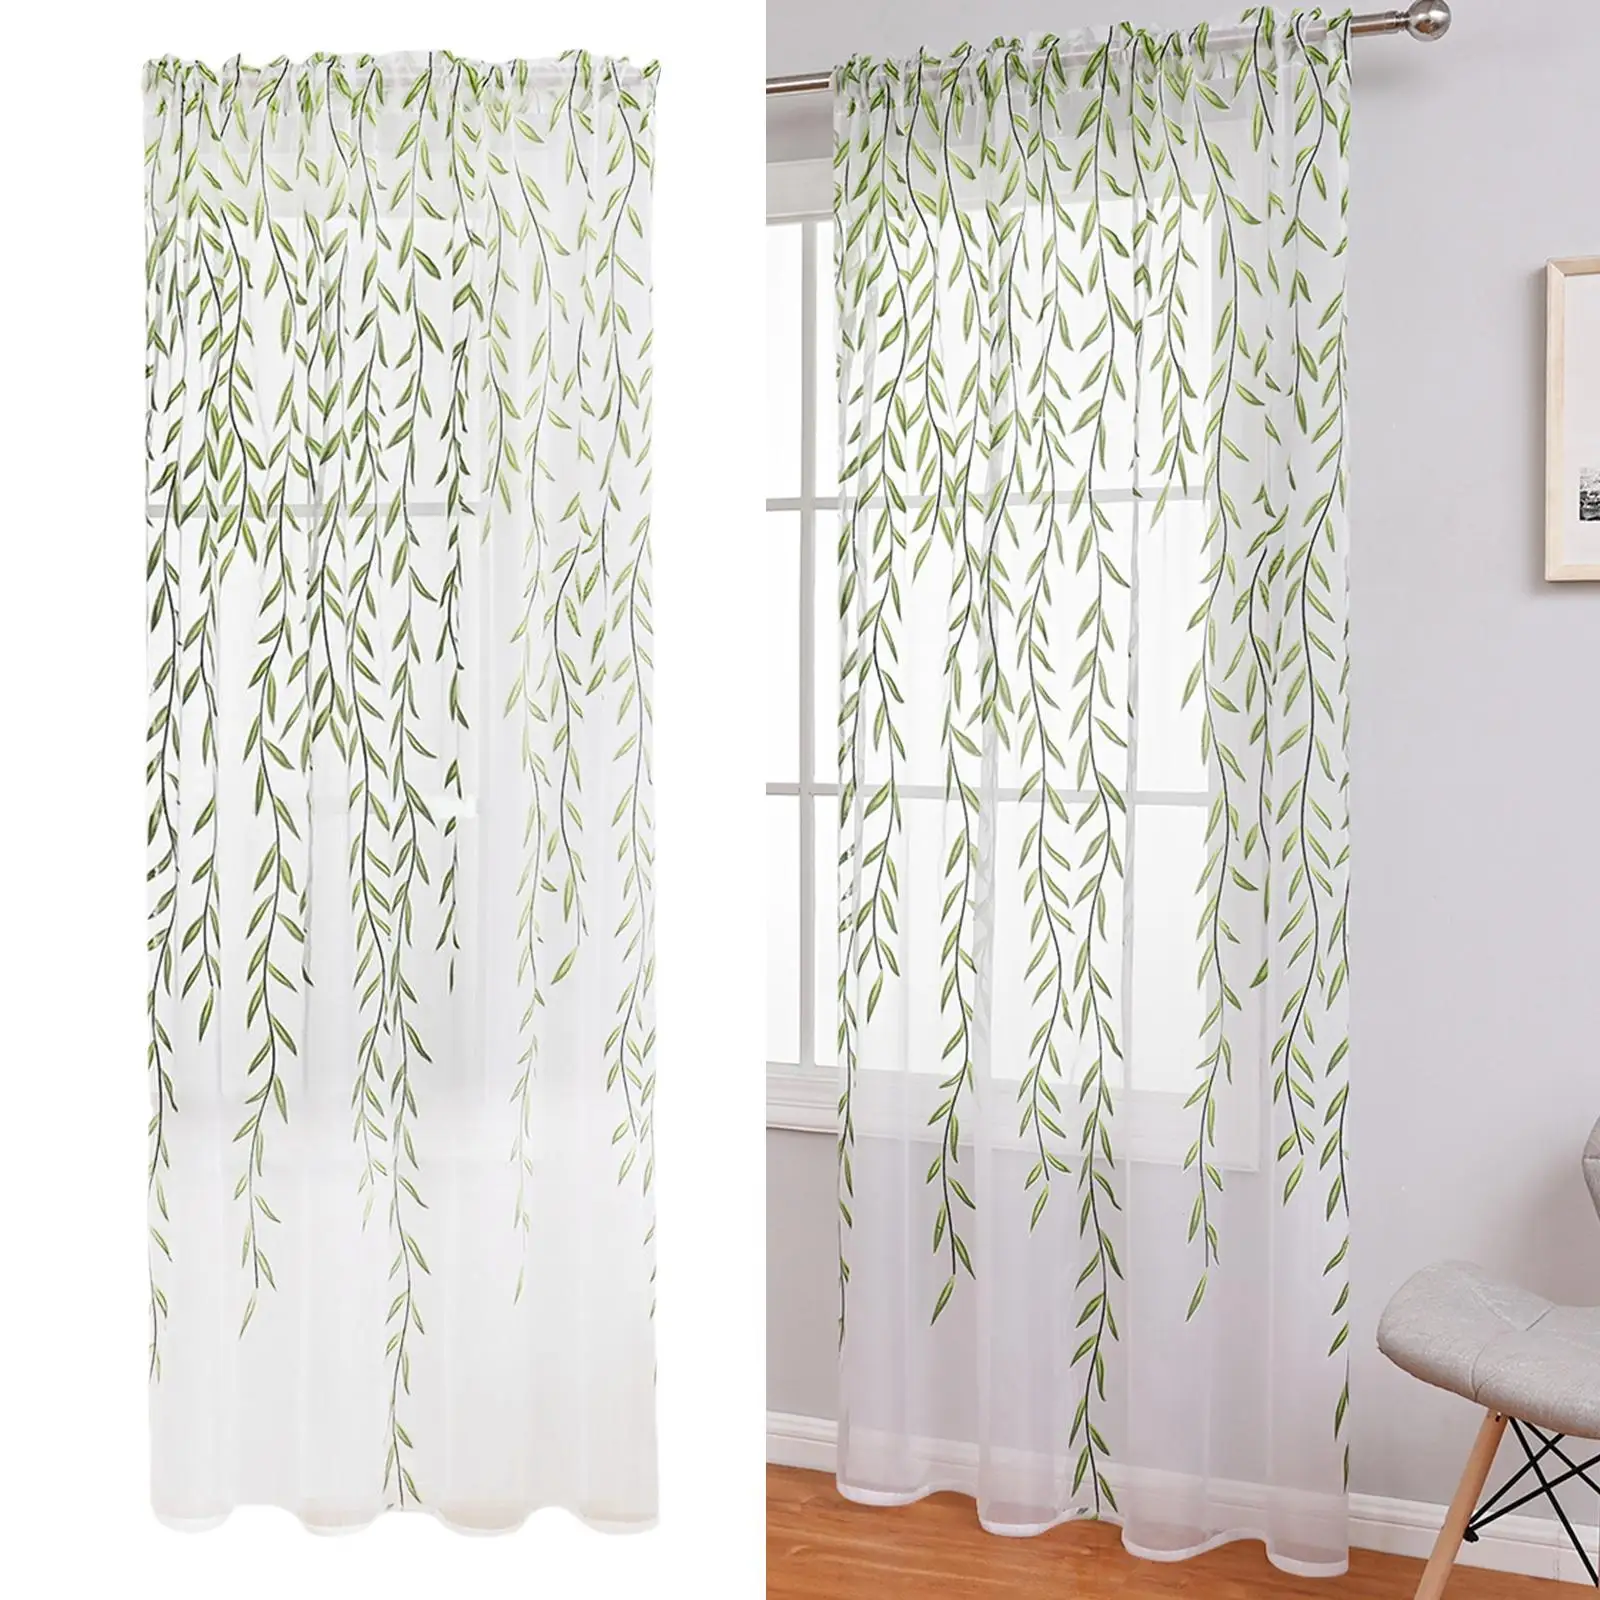 Gradient Embroidered Sheer Curtain Green Window Draperies Window Treatments Length Curtains Washable for Bedroom Children Living